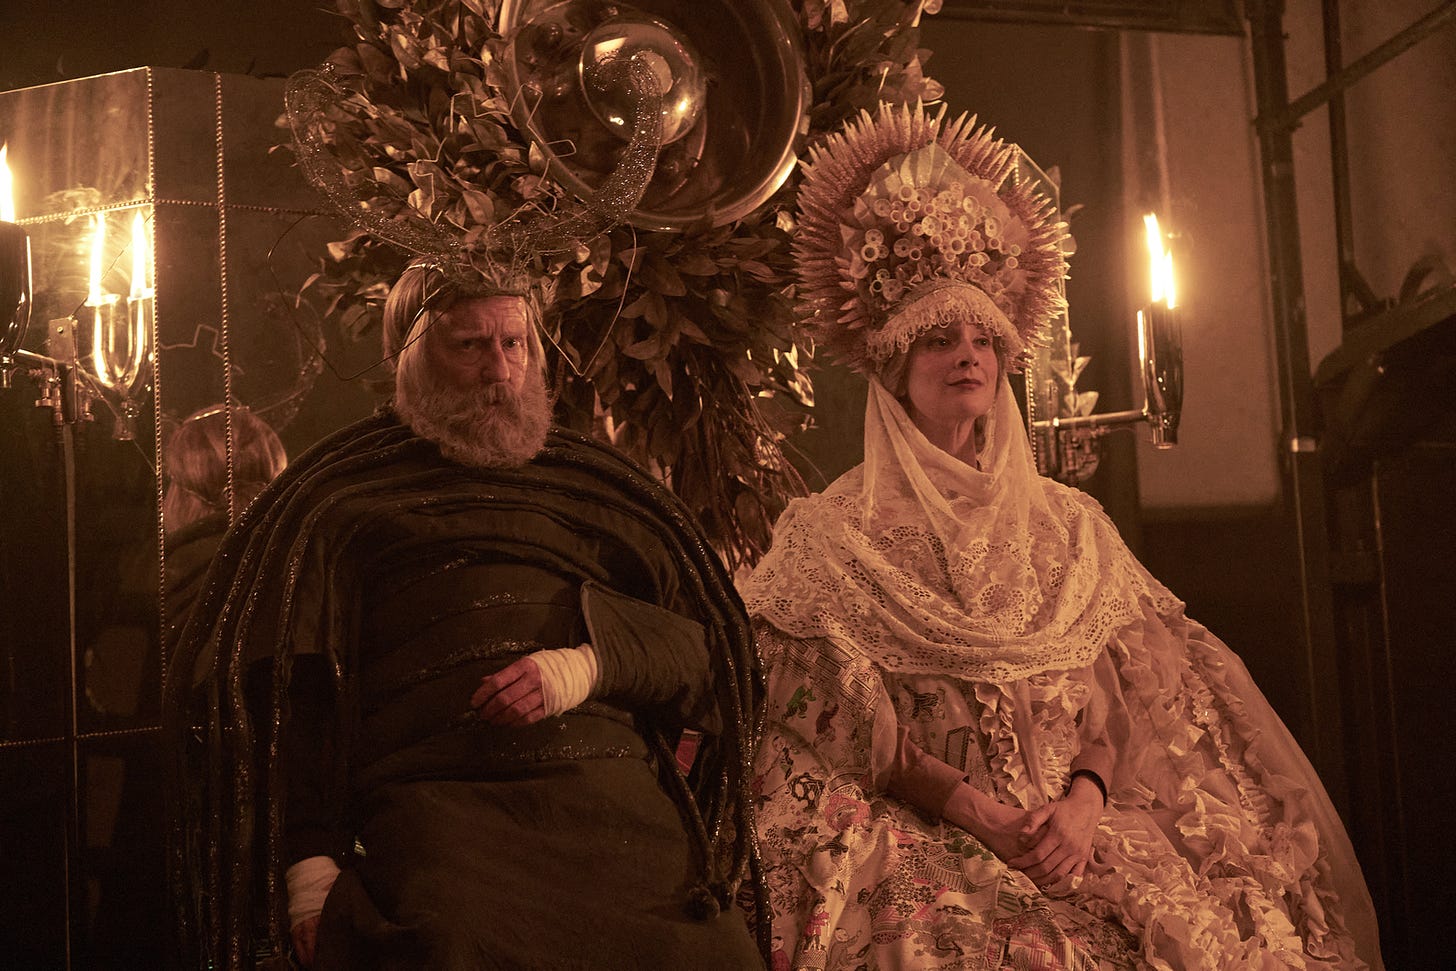 a white man with a grey beard wears a dark shroud and complicated gilded headpiece seated next to a white woman with blonde hair wearing a gown of florals and lace with a gilded headpiece resembling a sunflower. they are seated on a stage illuminated by candelabra.